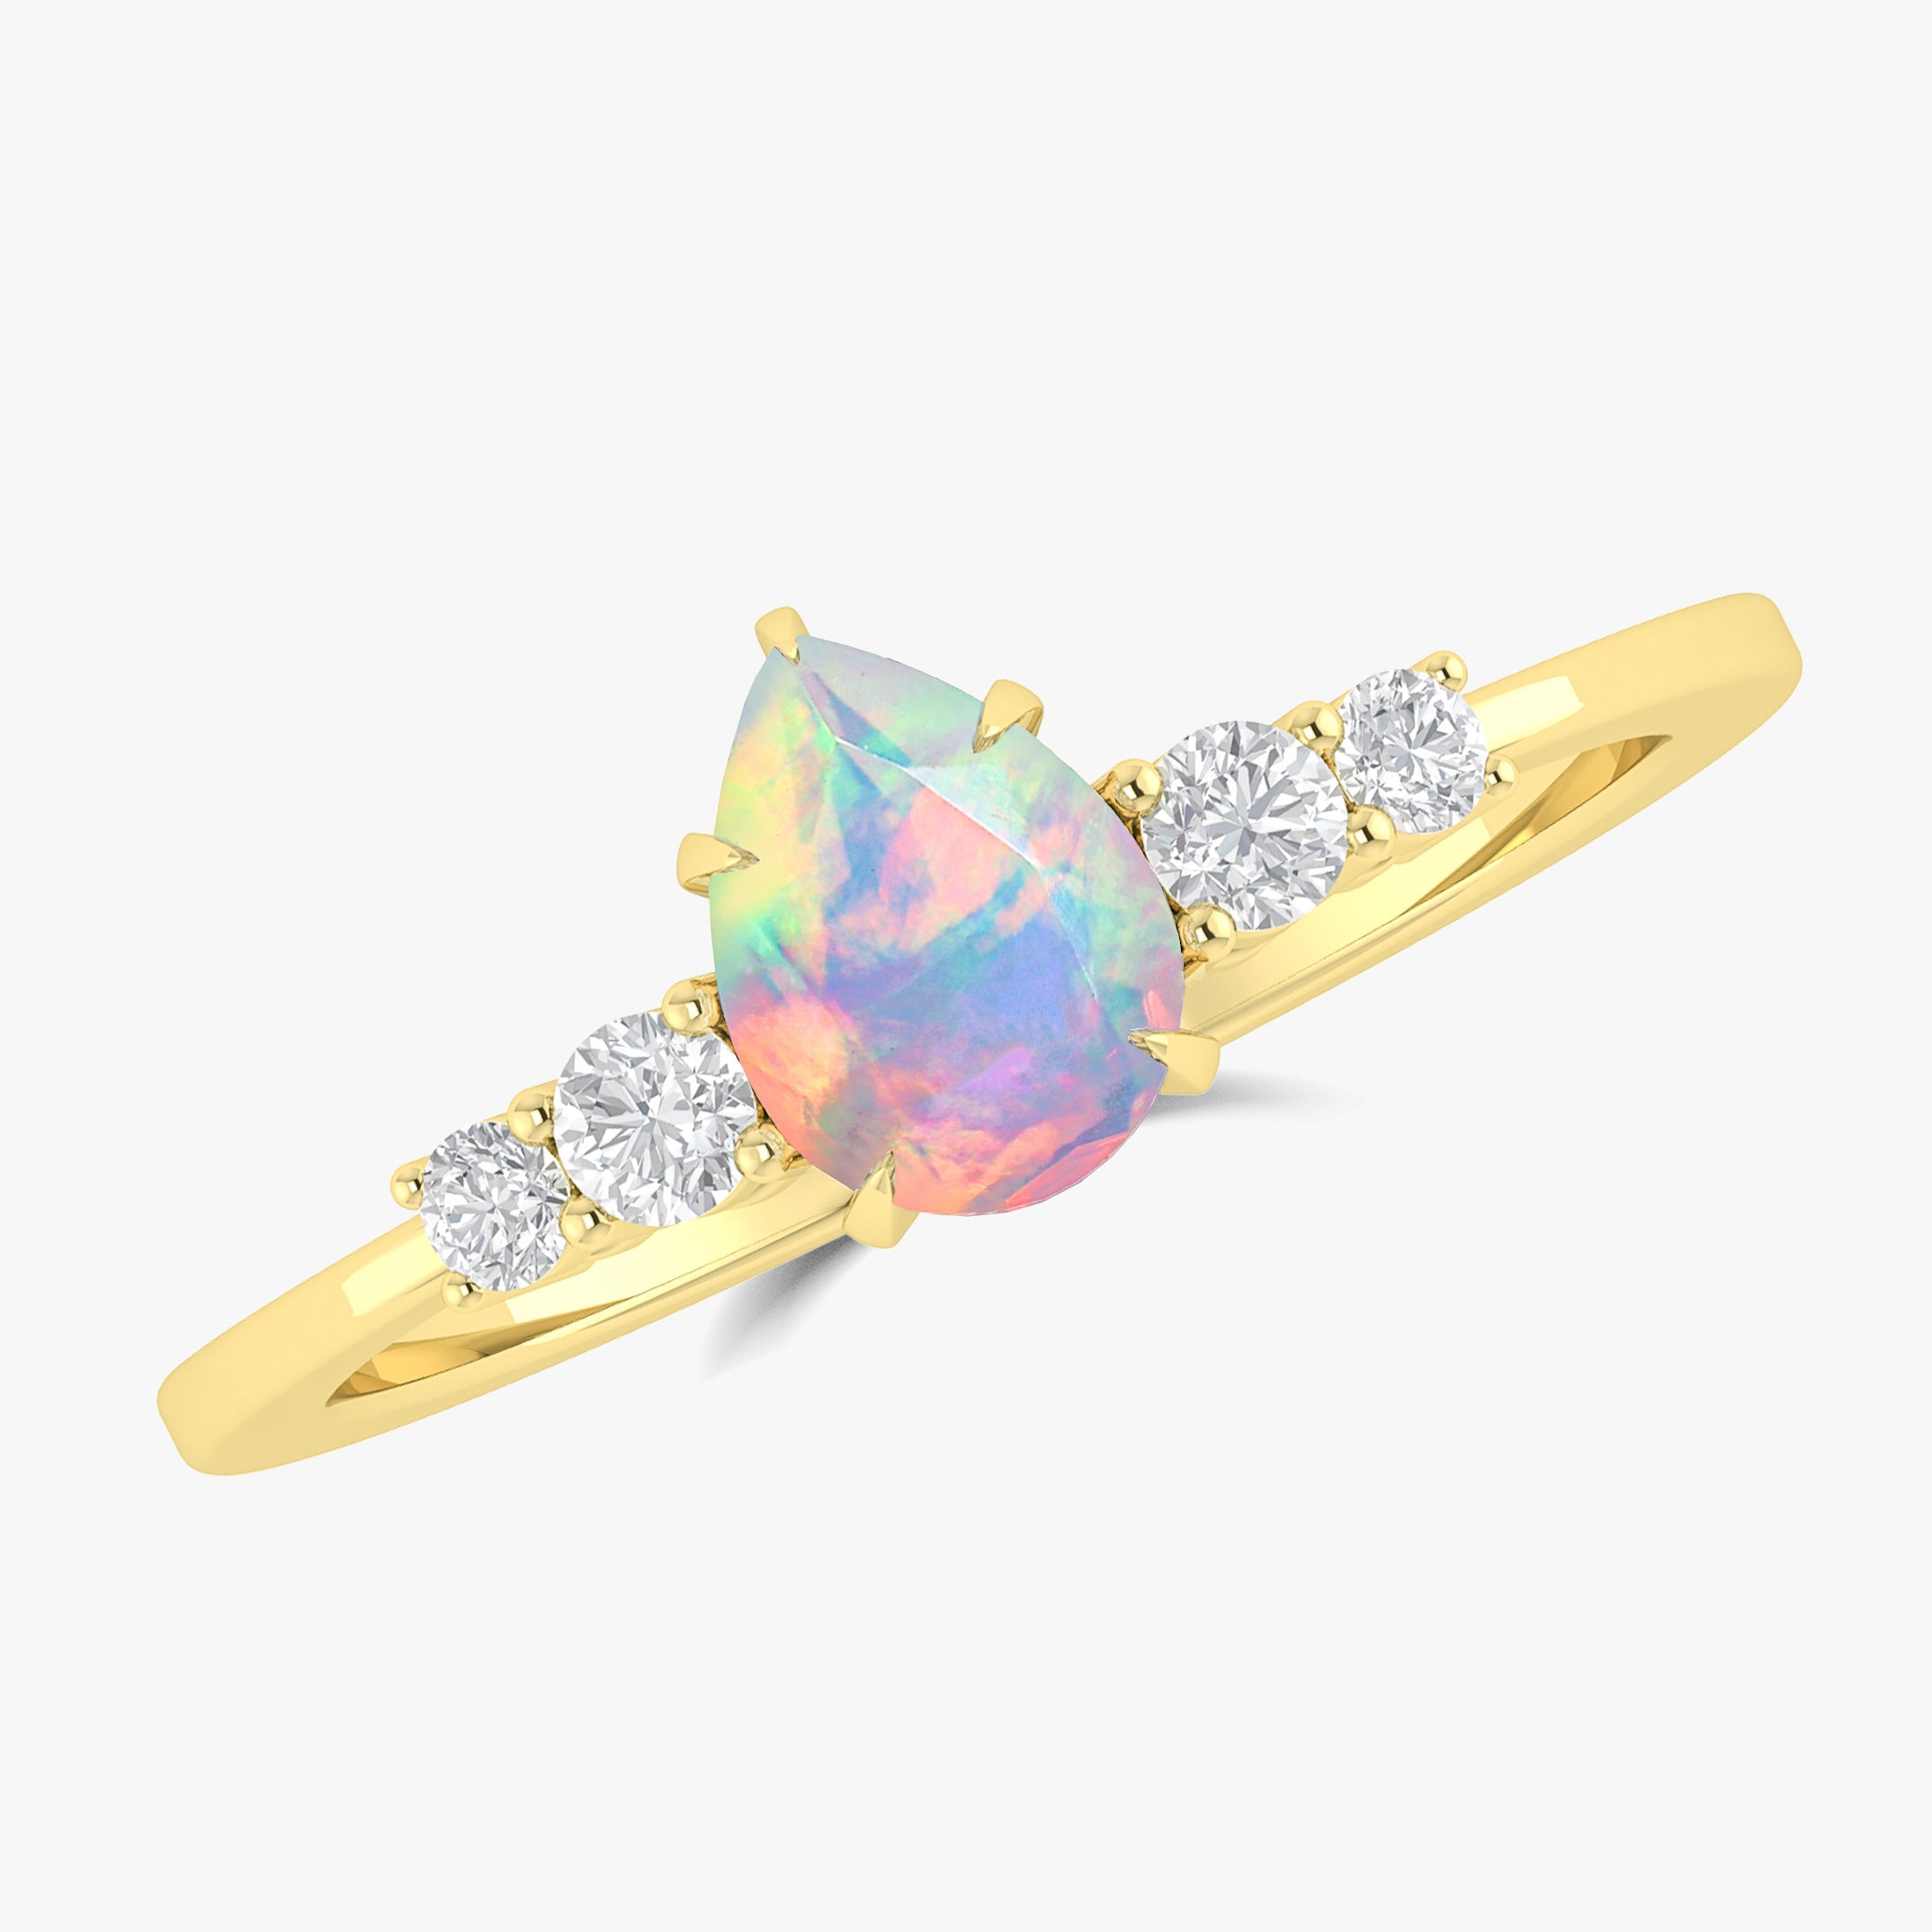 White Natural Ethiopian Opal Faceted Pear Ring